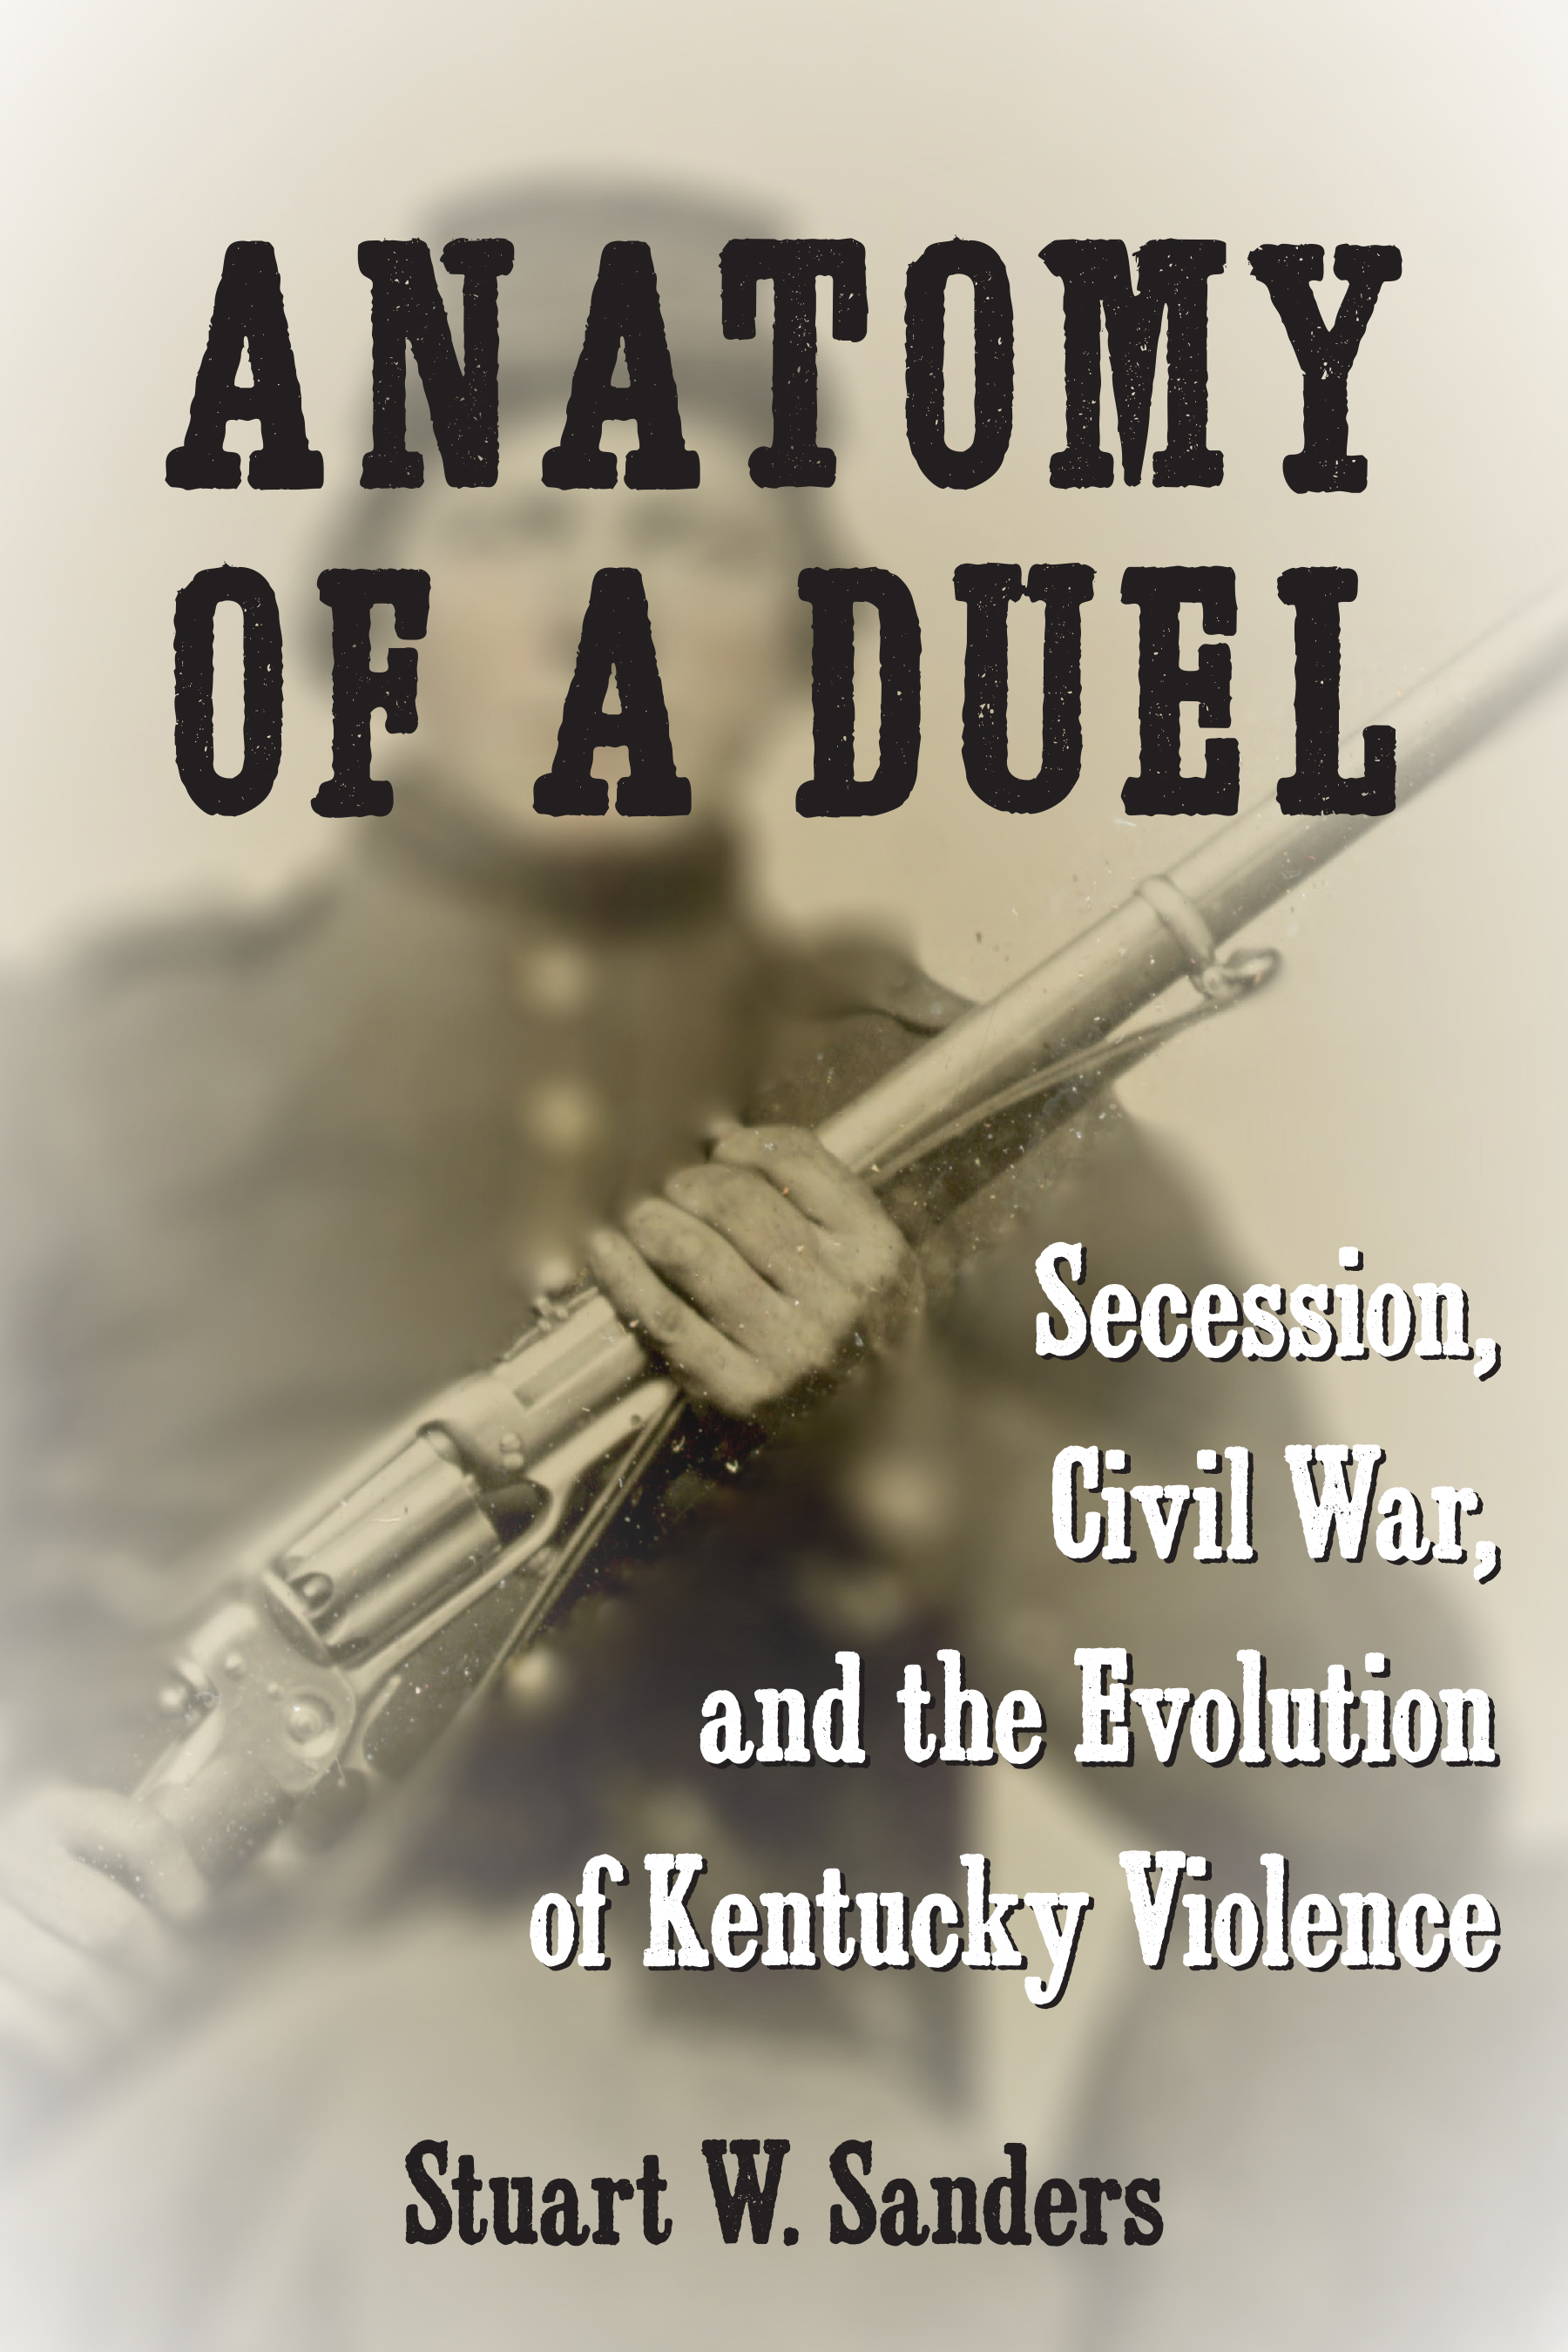 Book cover - Anatomy of a Duel by Stuart Sanders